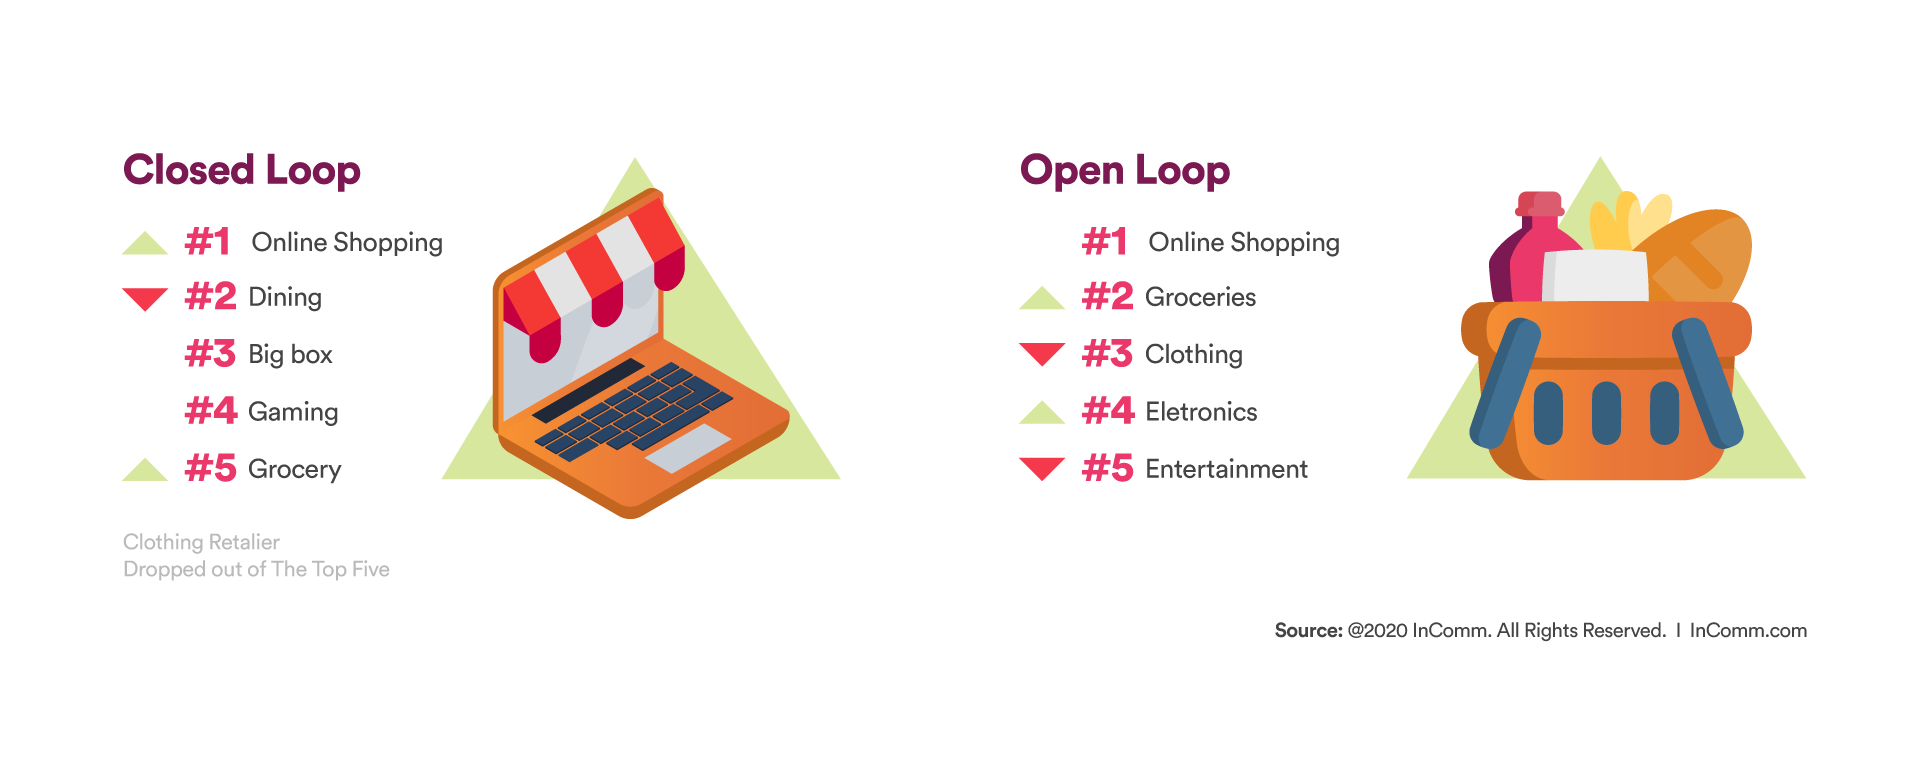 Closed loop and Open loop graphic